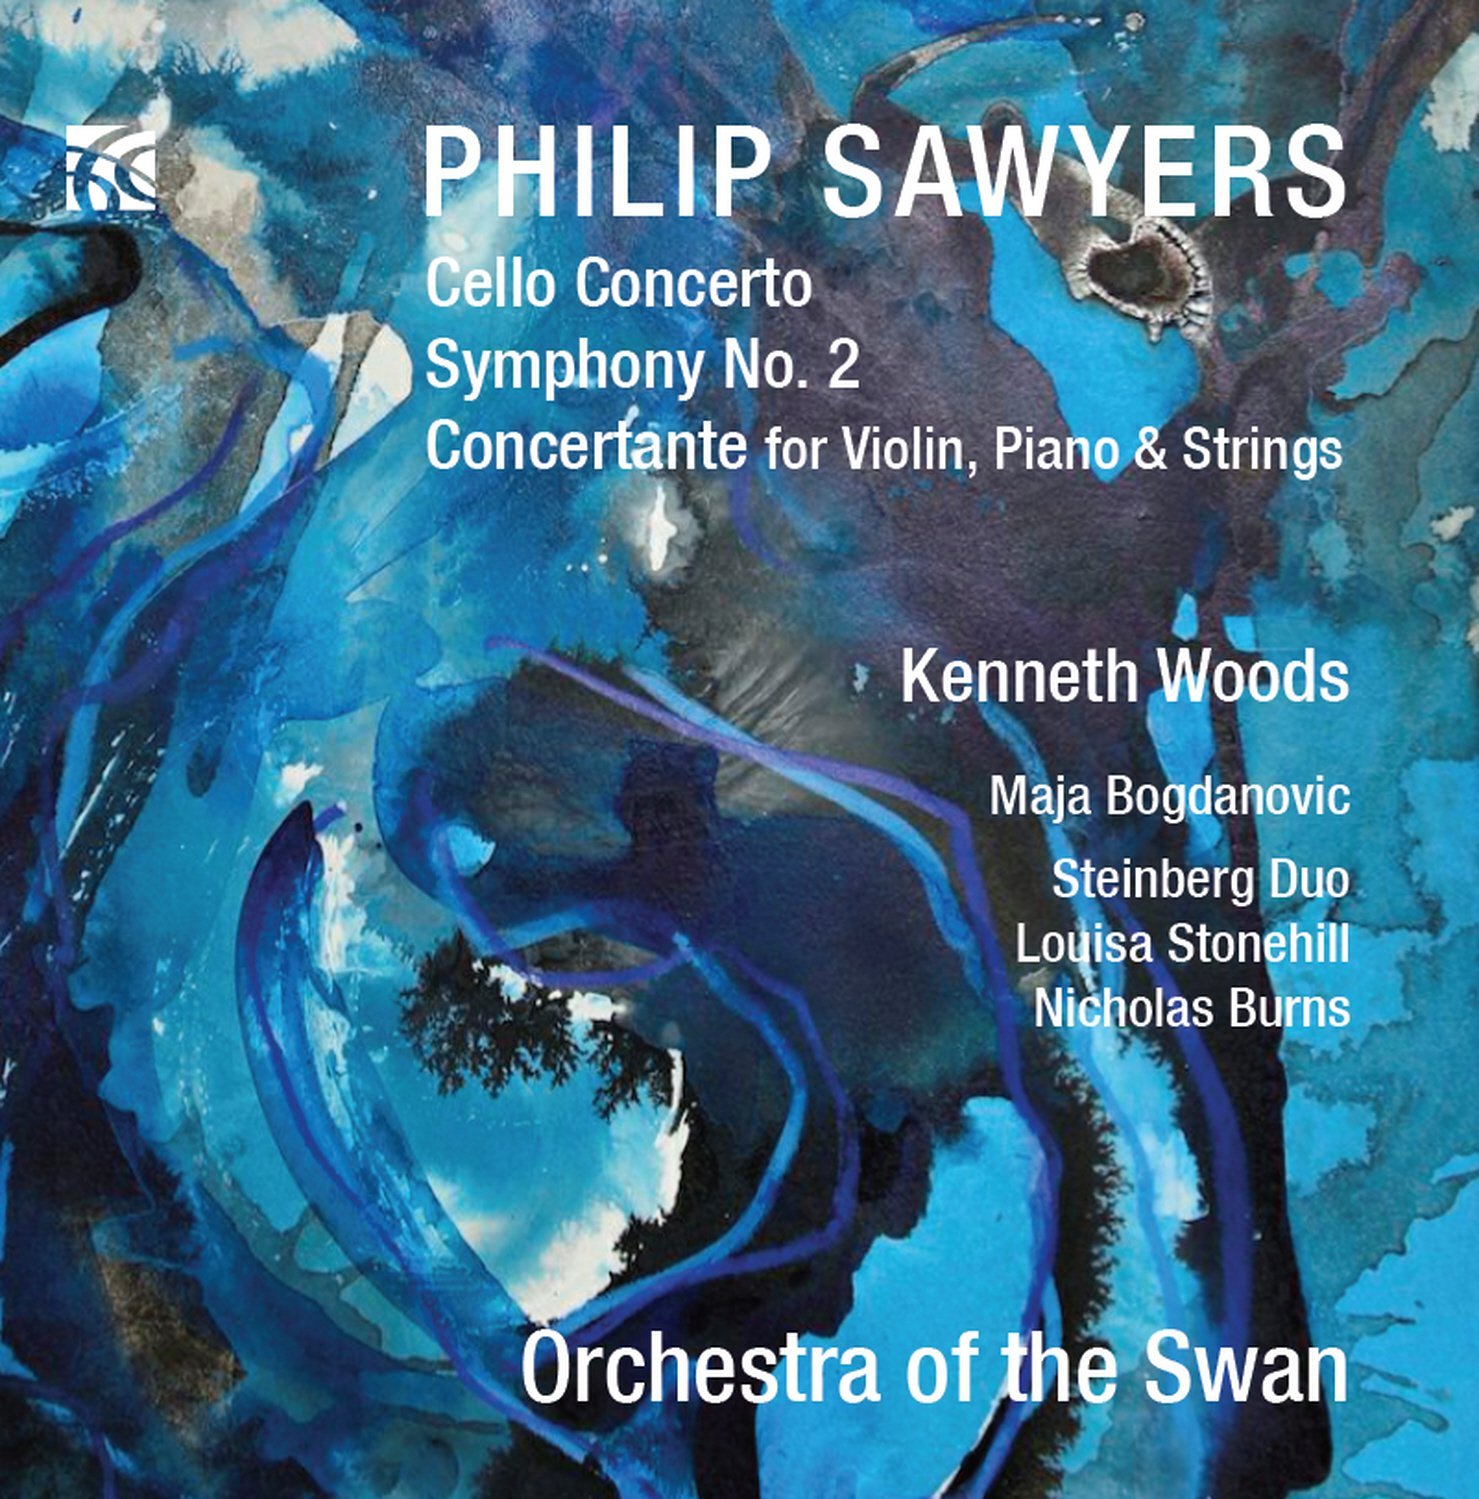 CD Review- Gramophone Magazine on Sawyers Symphony no. 2, Cello Concerto and Concertante for Violin, Piano and Strings